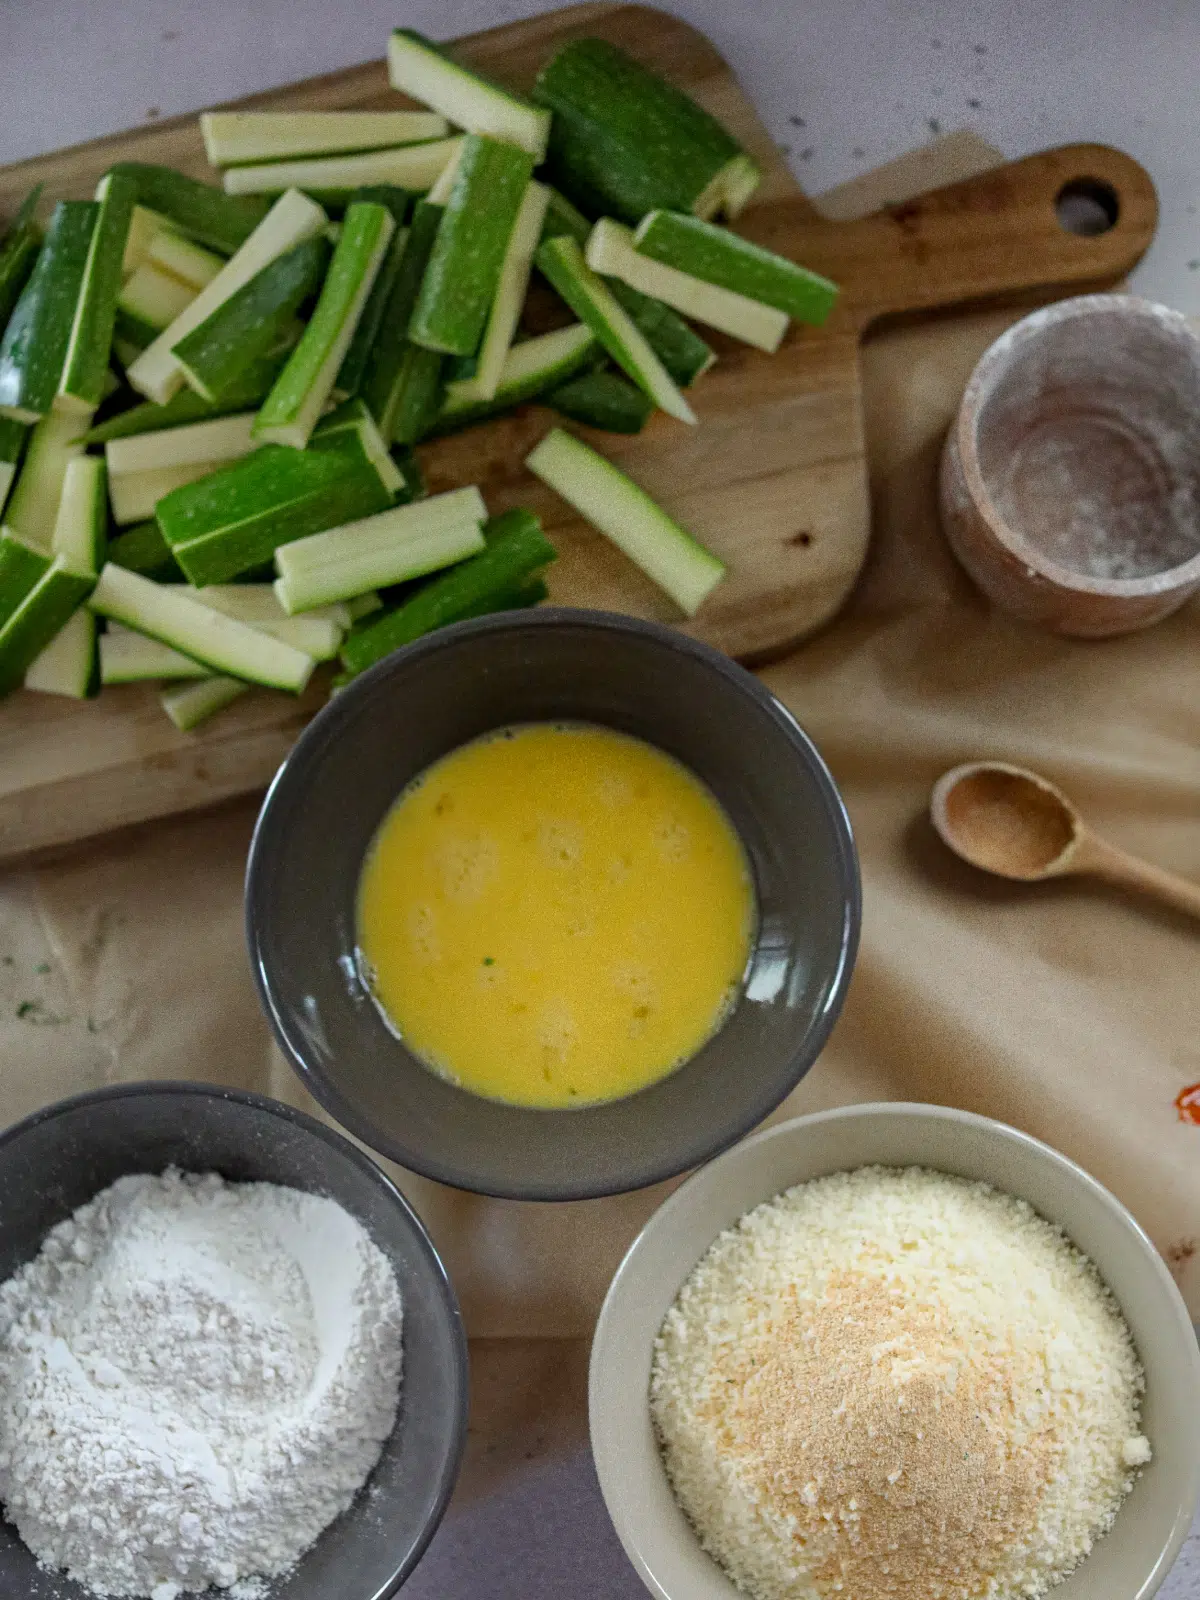 Ingredients for Parmesan Crusted Zucchini Sticks.